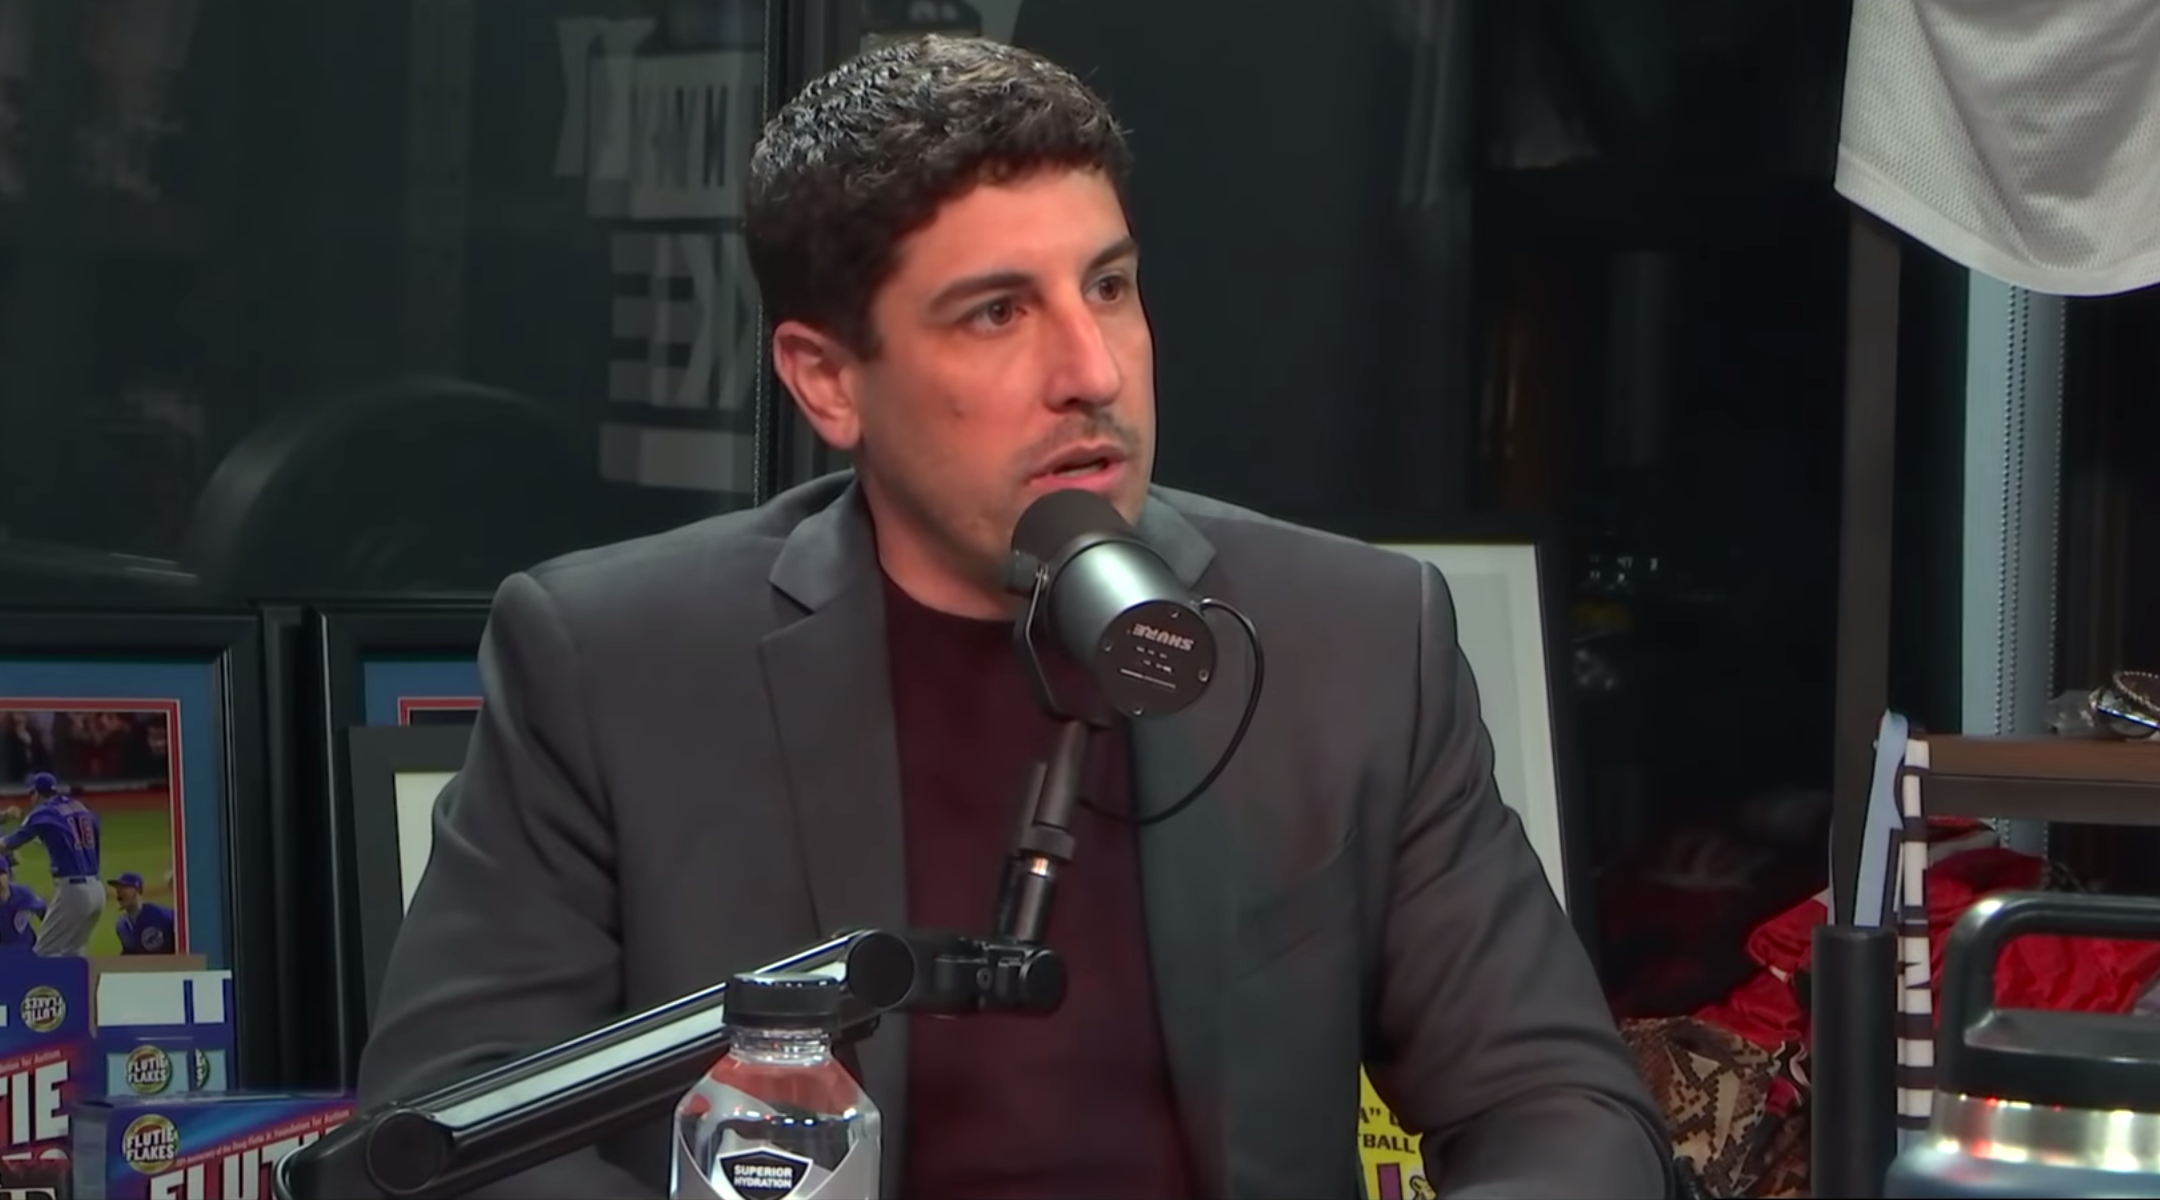 Jason Biggs is known for playing Jewish roles. (Screen shot from YouTube)